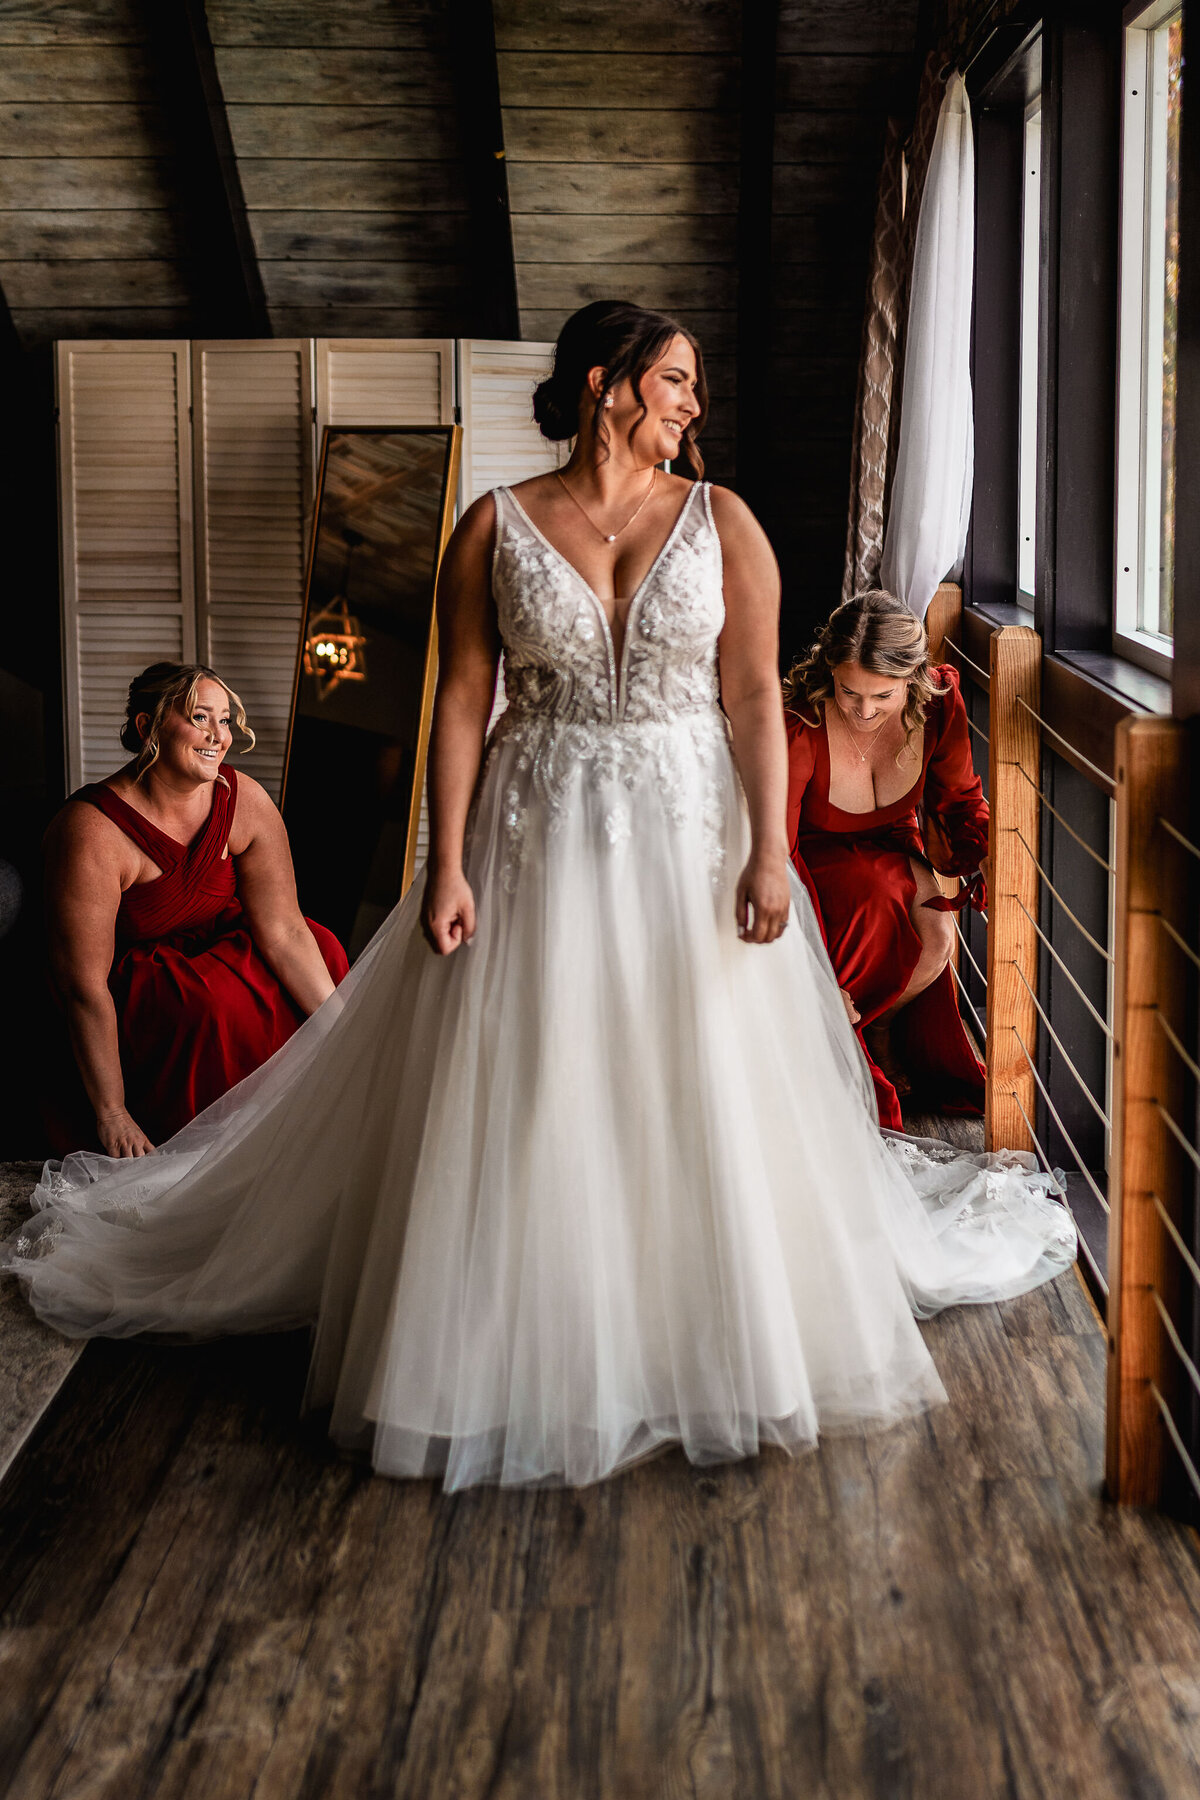 Bride's sisters fluffing her dress as she looks out the window at Waterville Valley wedding in NH by Lisa Smith Photography